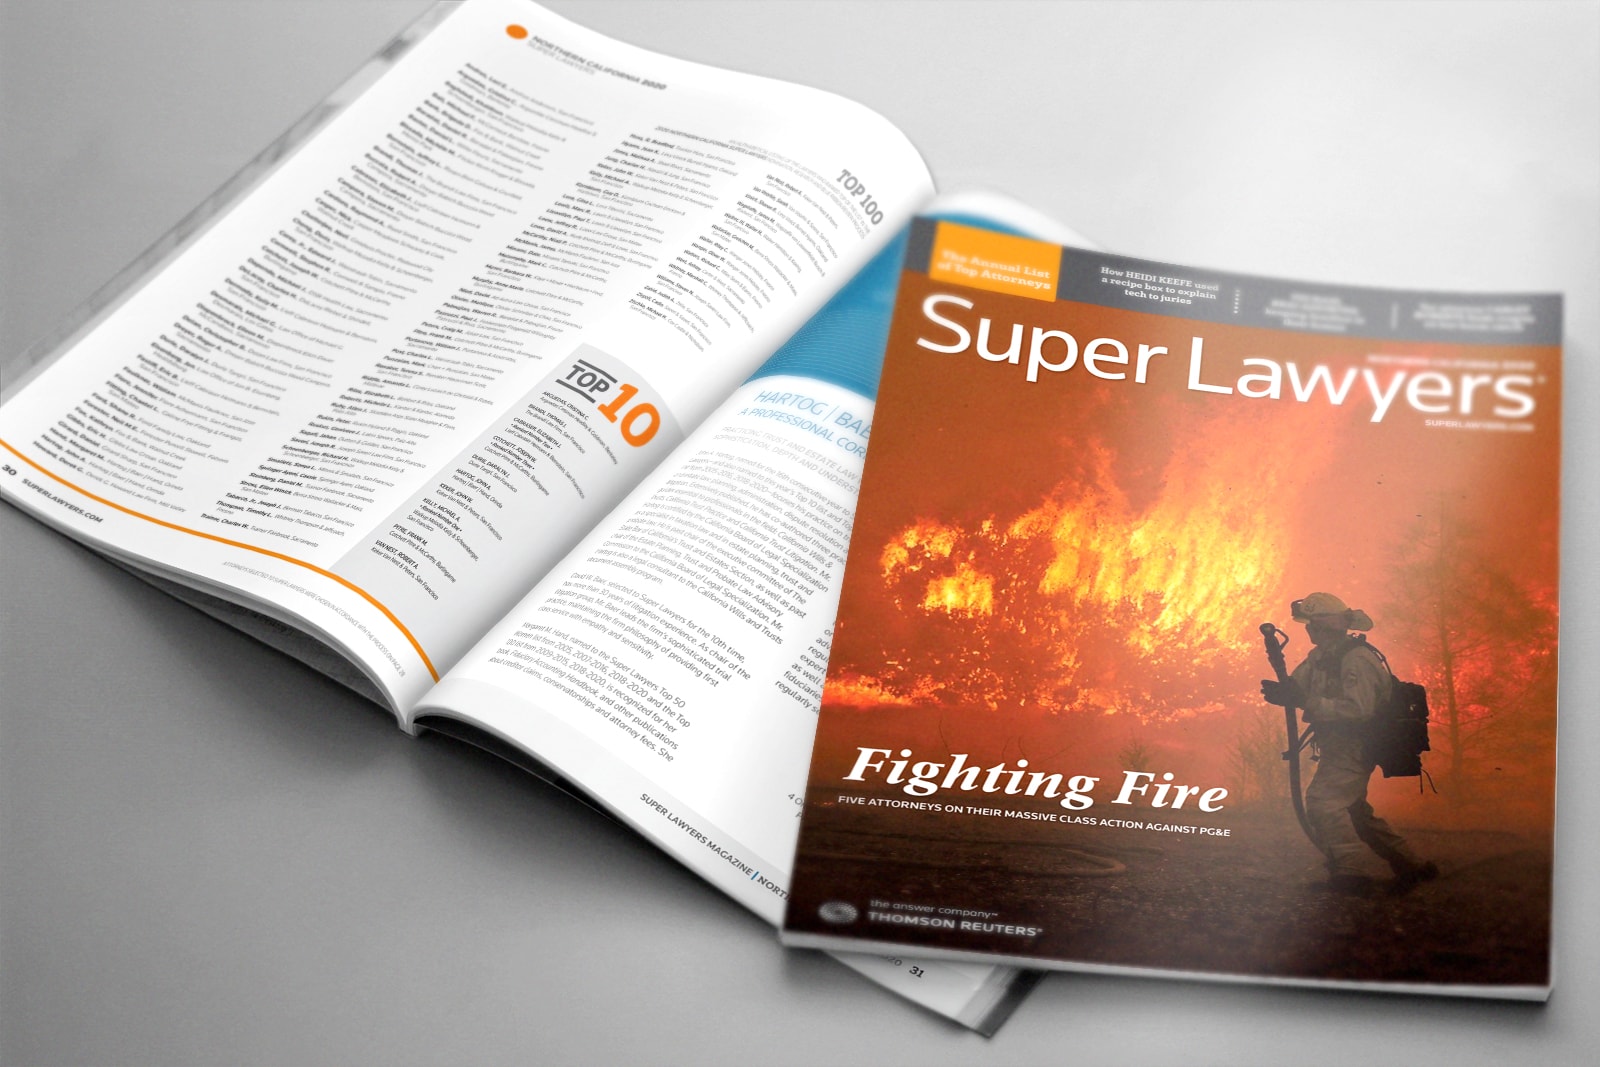 Copies of the 2020 SuperLawyers publication